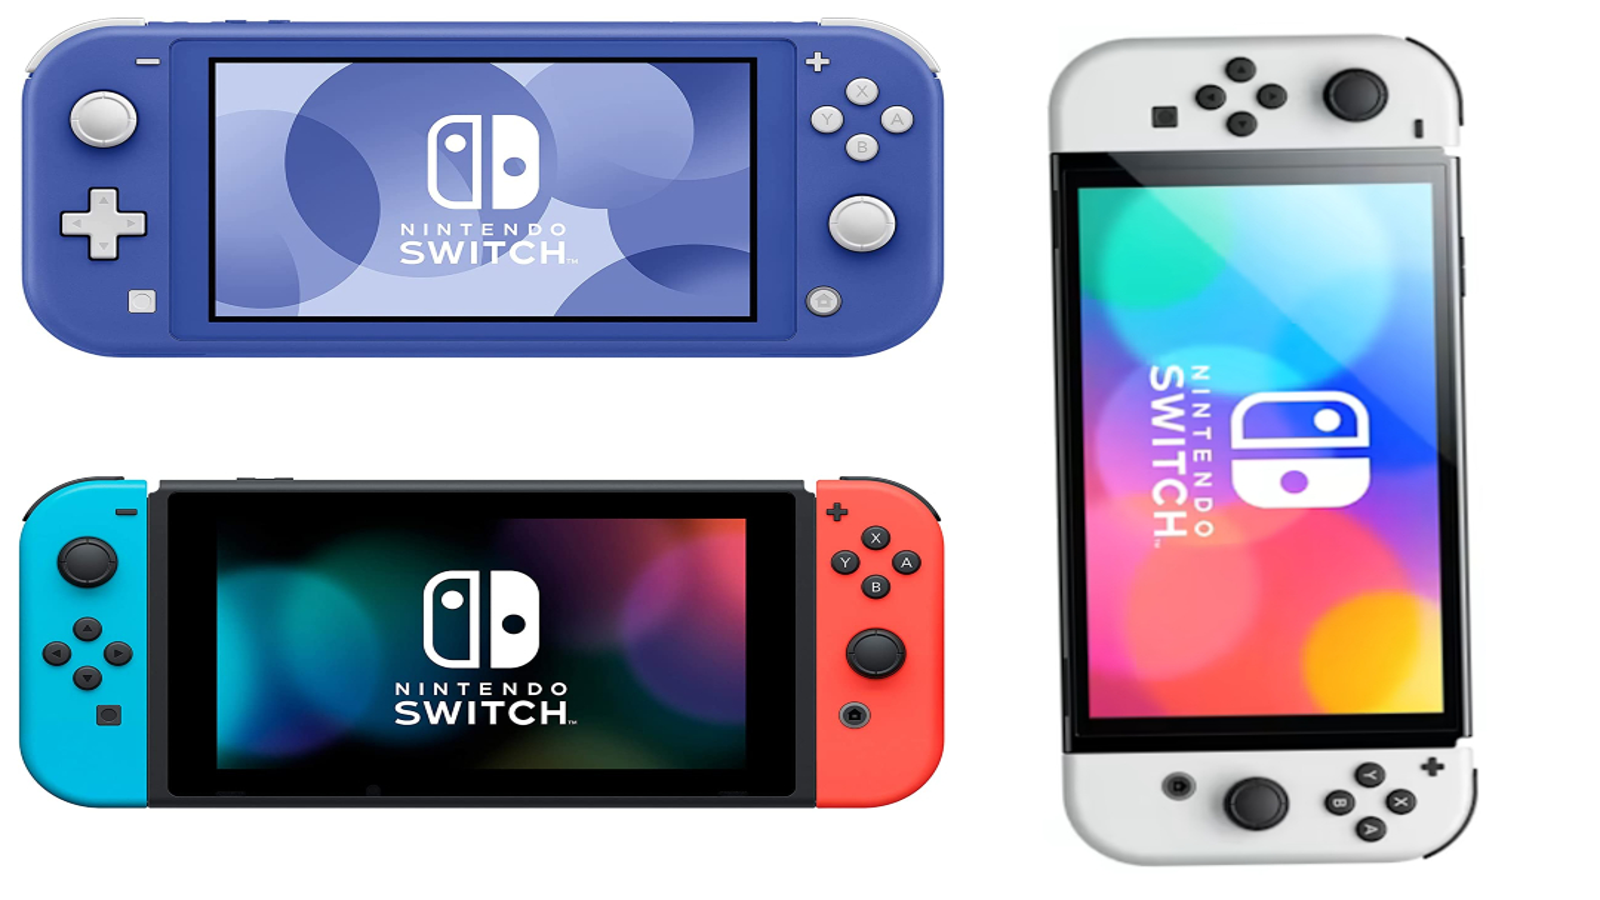 Nintendo Switch Online memberships are getting huge mark downs for